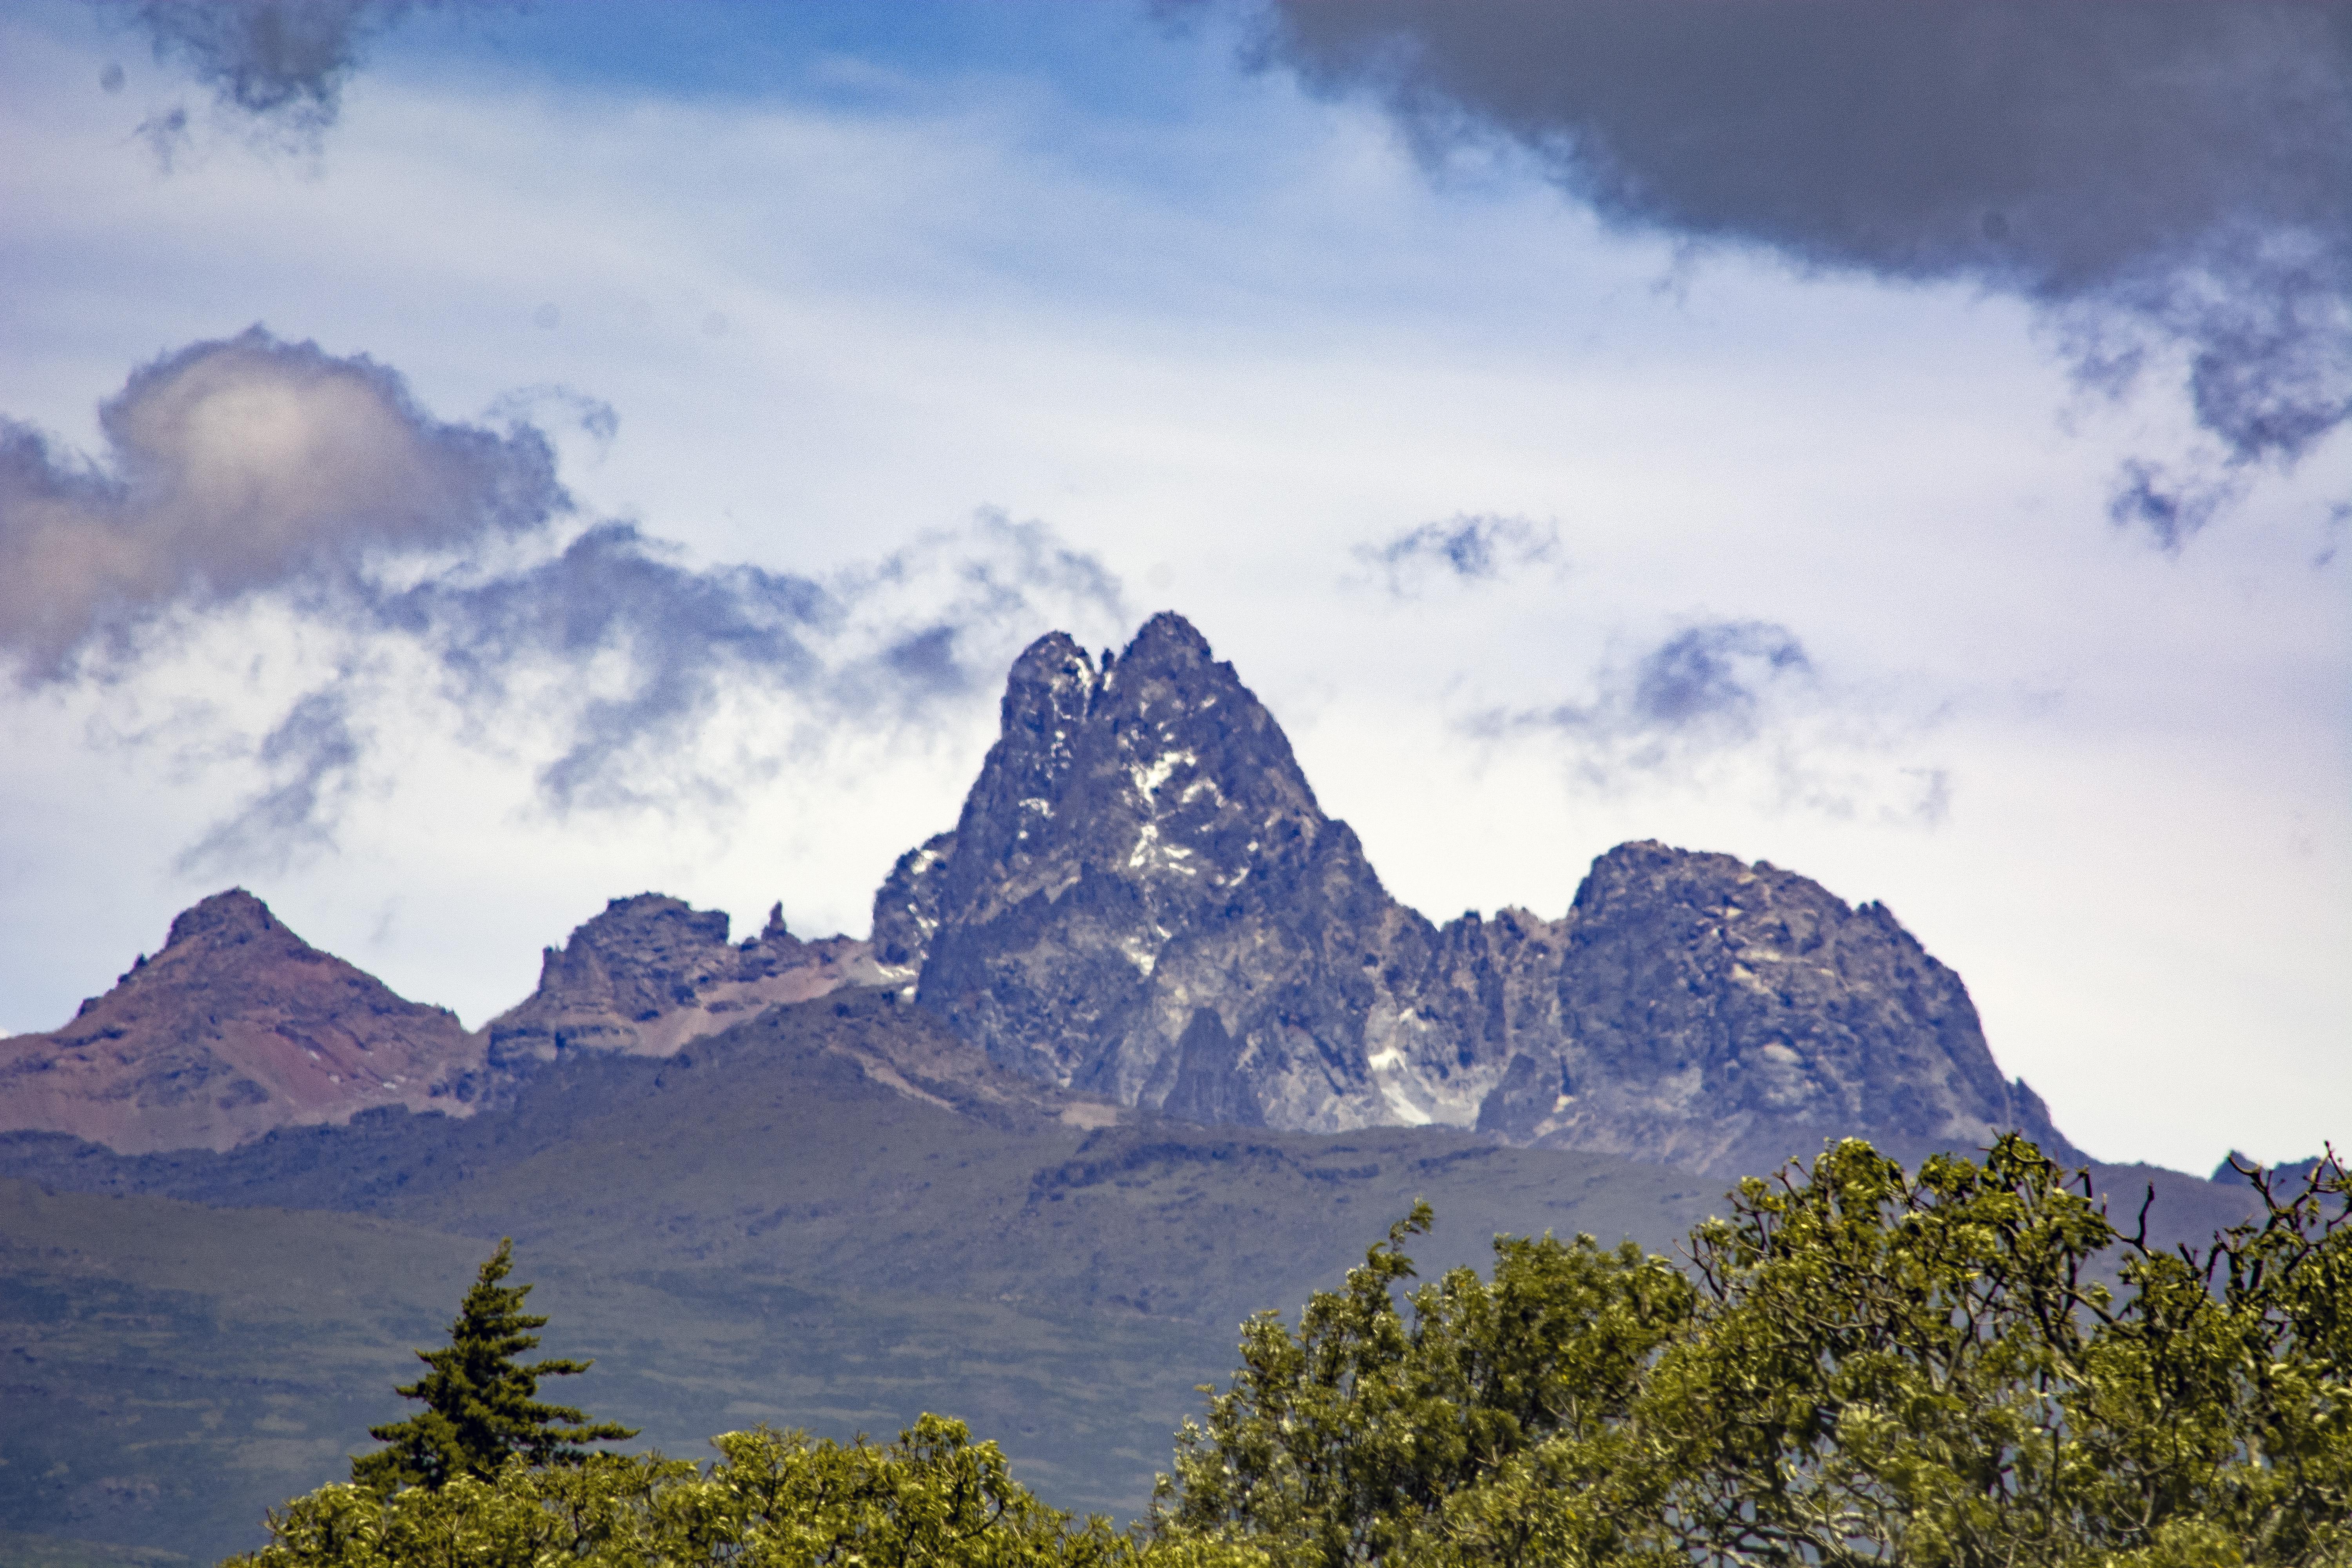 3. Embracing the Unique Traditions and Customs of Mount Kenya's Indigenous Communities